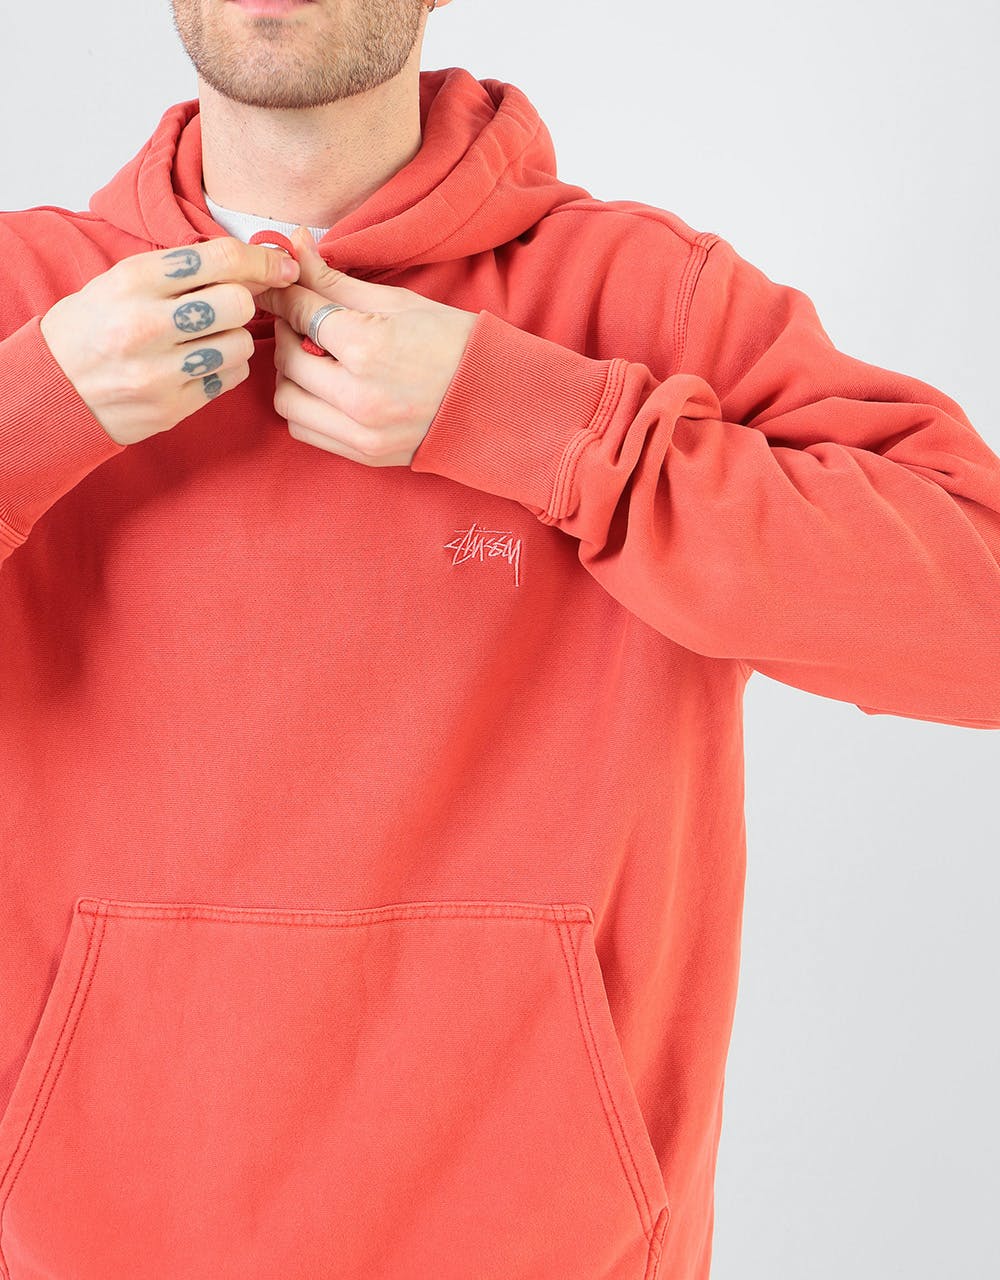 Stüssy Stock Logo Pullover Hoodie - Red